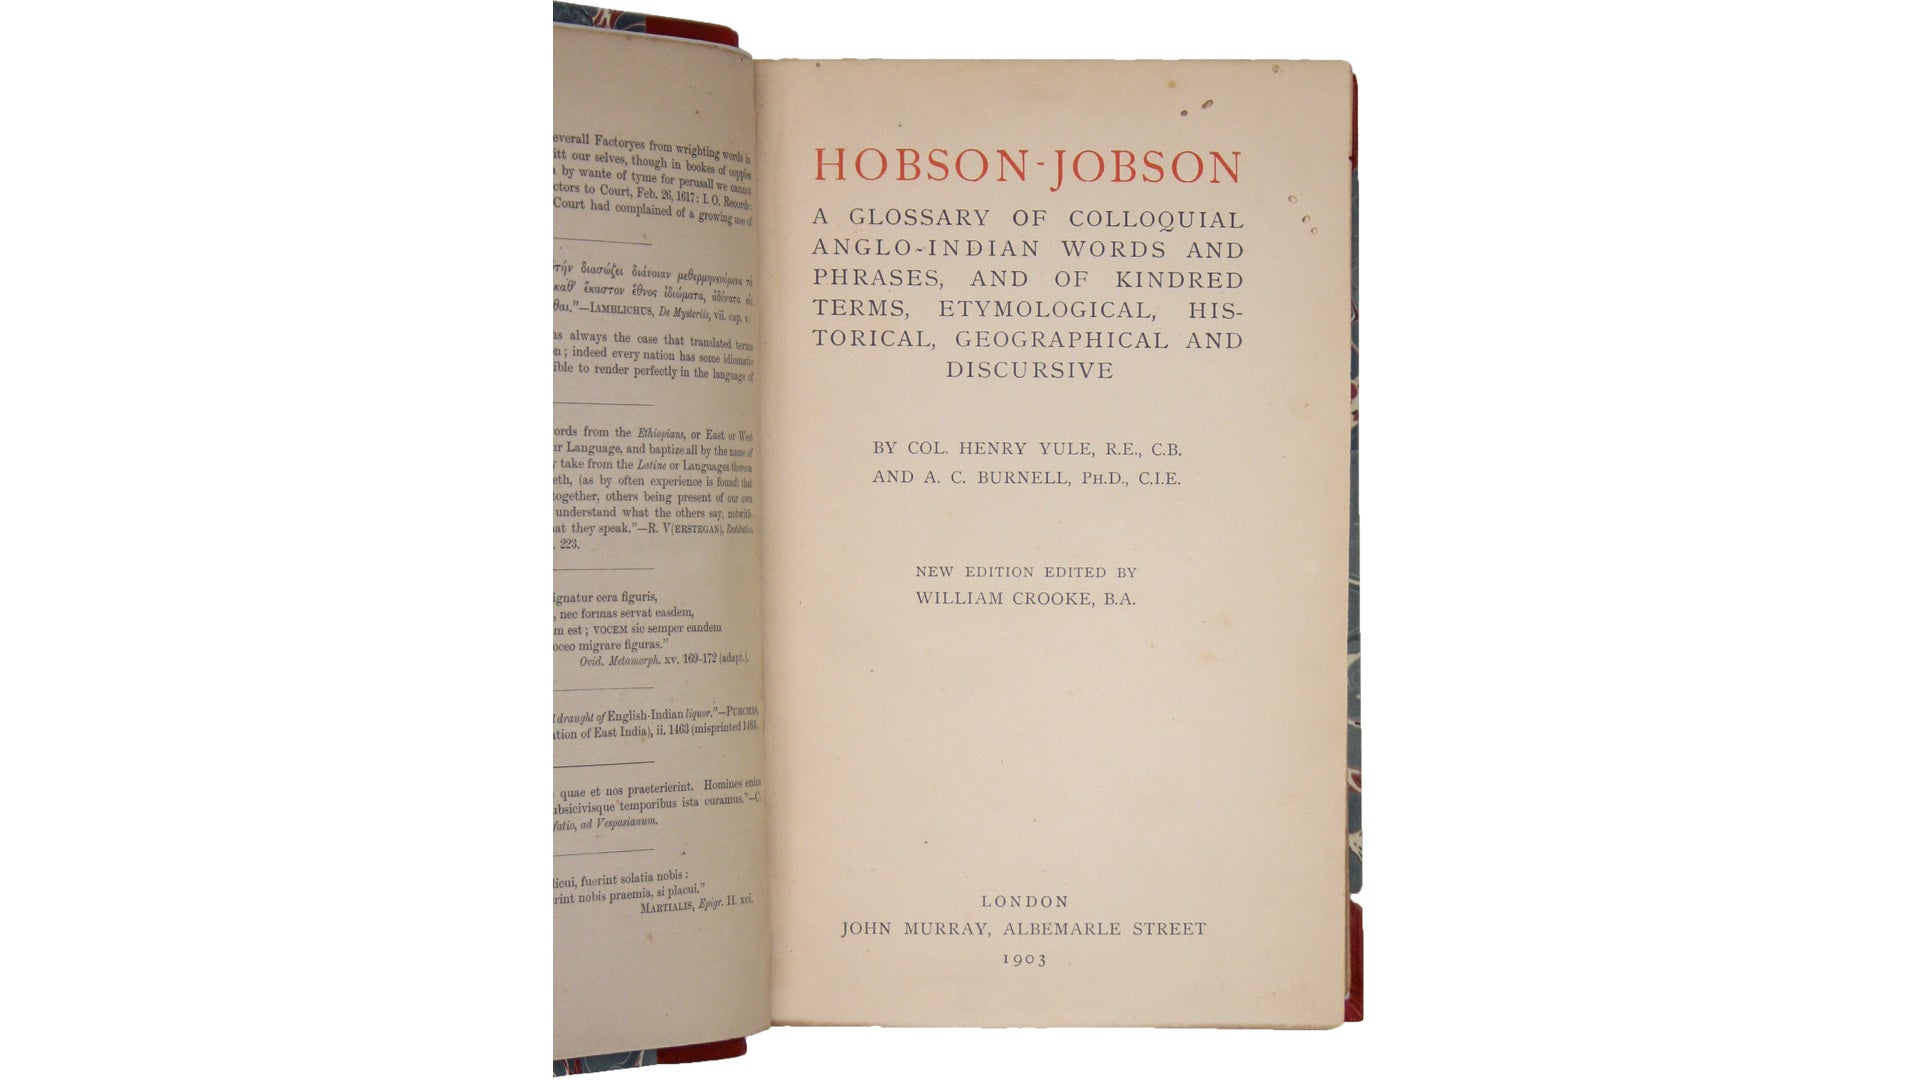 Second Revised Edition of Hobson Jobson